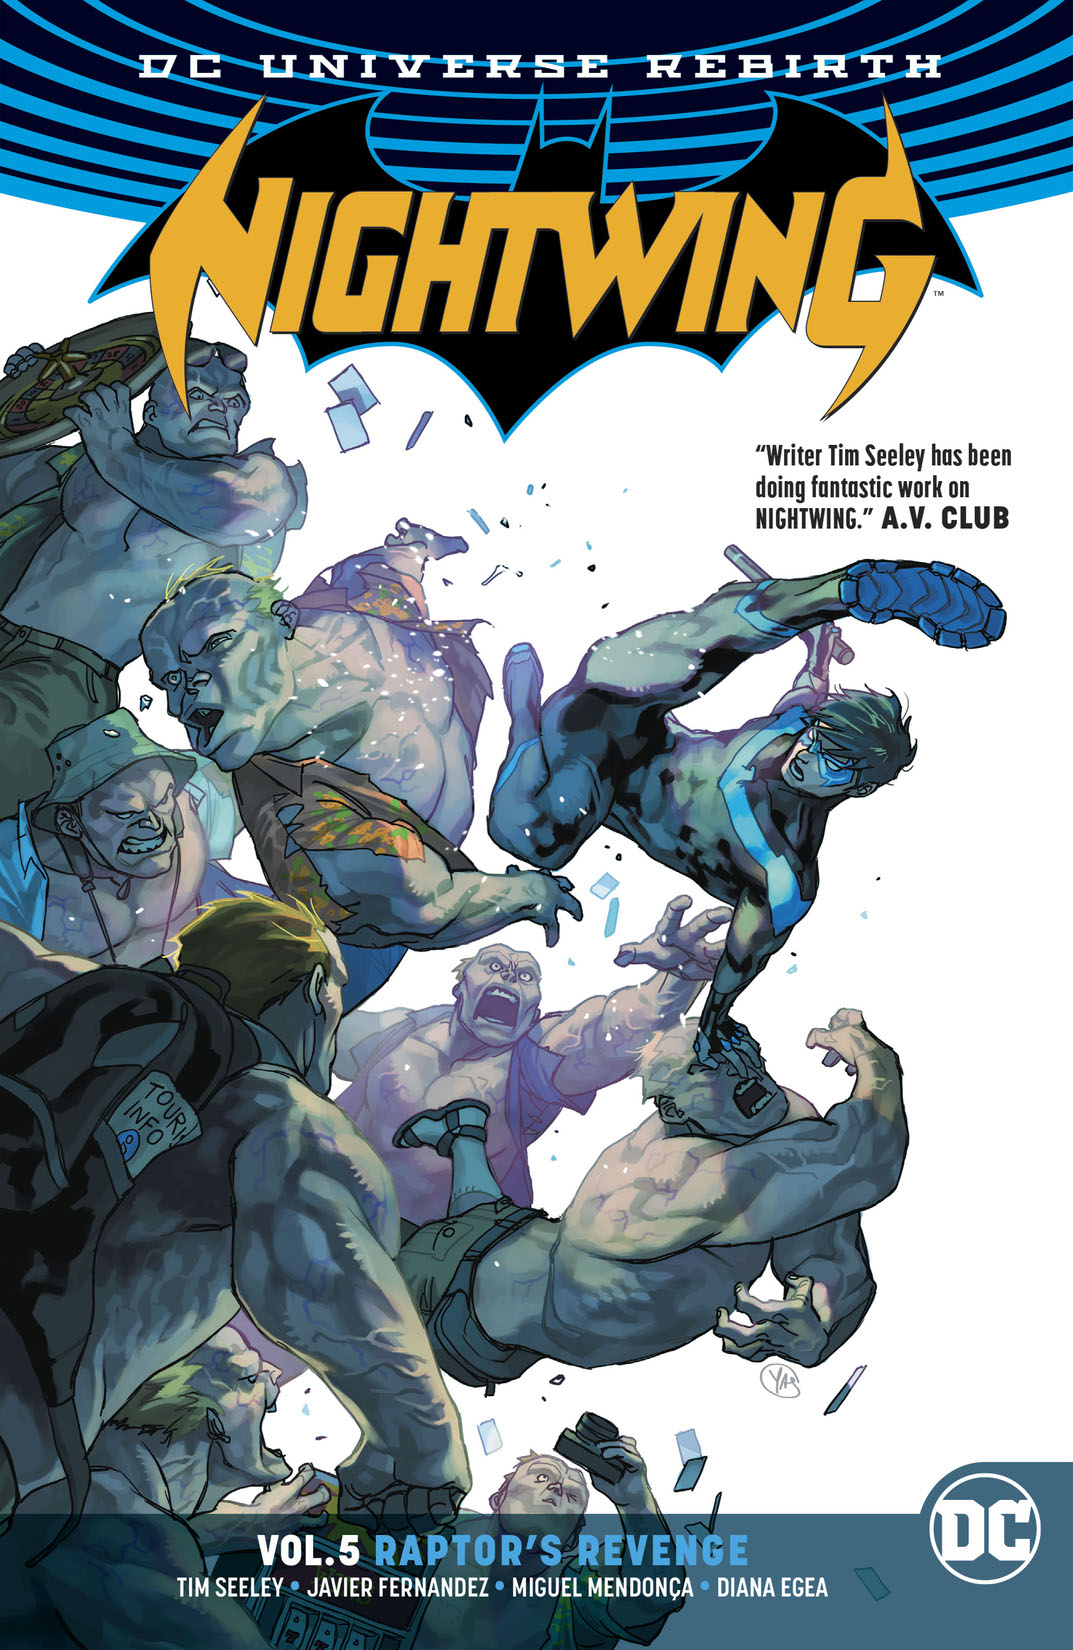 Nightwing Vol. 5: Raptor's Revenge  preview images